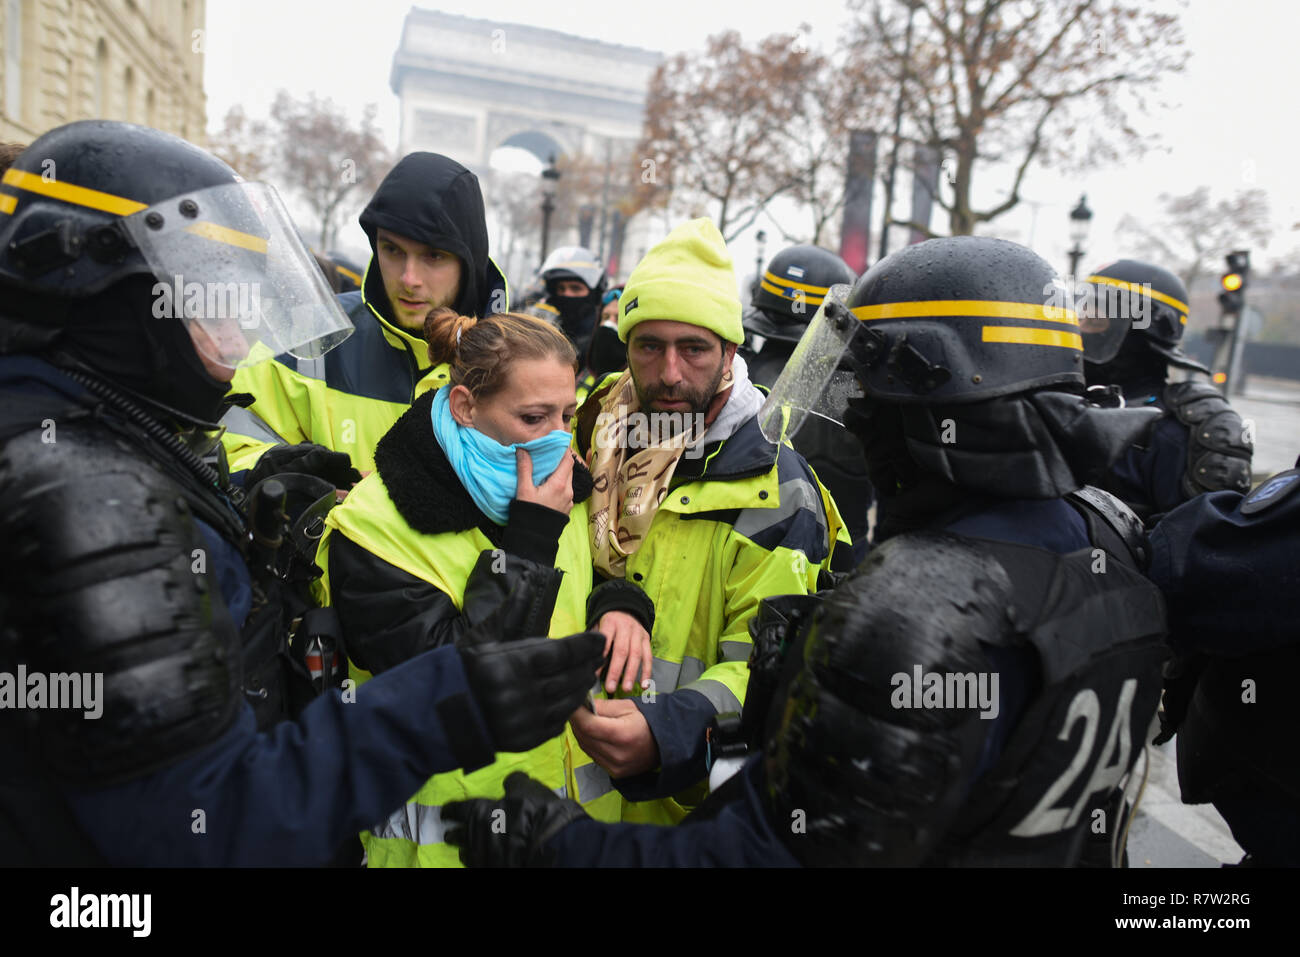 December 01, 2018 - Paris, France: Police check yellow vest protesters's  belongings before letting them enter on the Champs-Elysees to make sure  they don't carry weapons. Des gilets jaunes se font fouiller